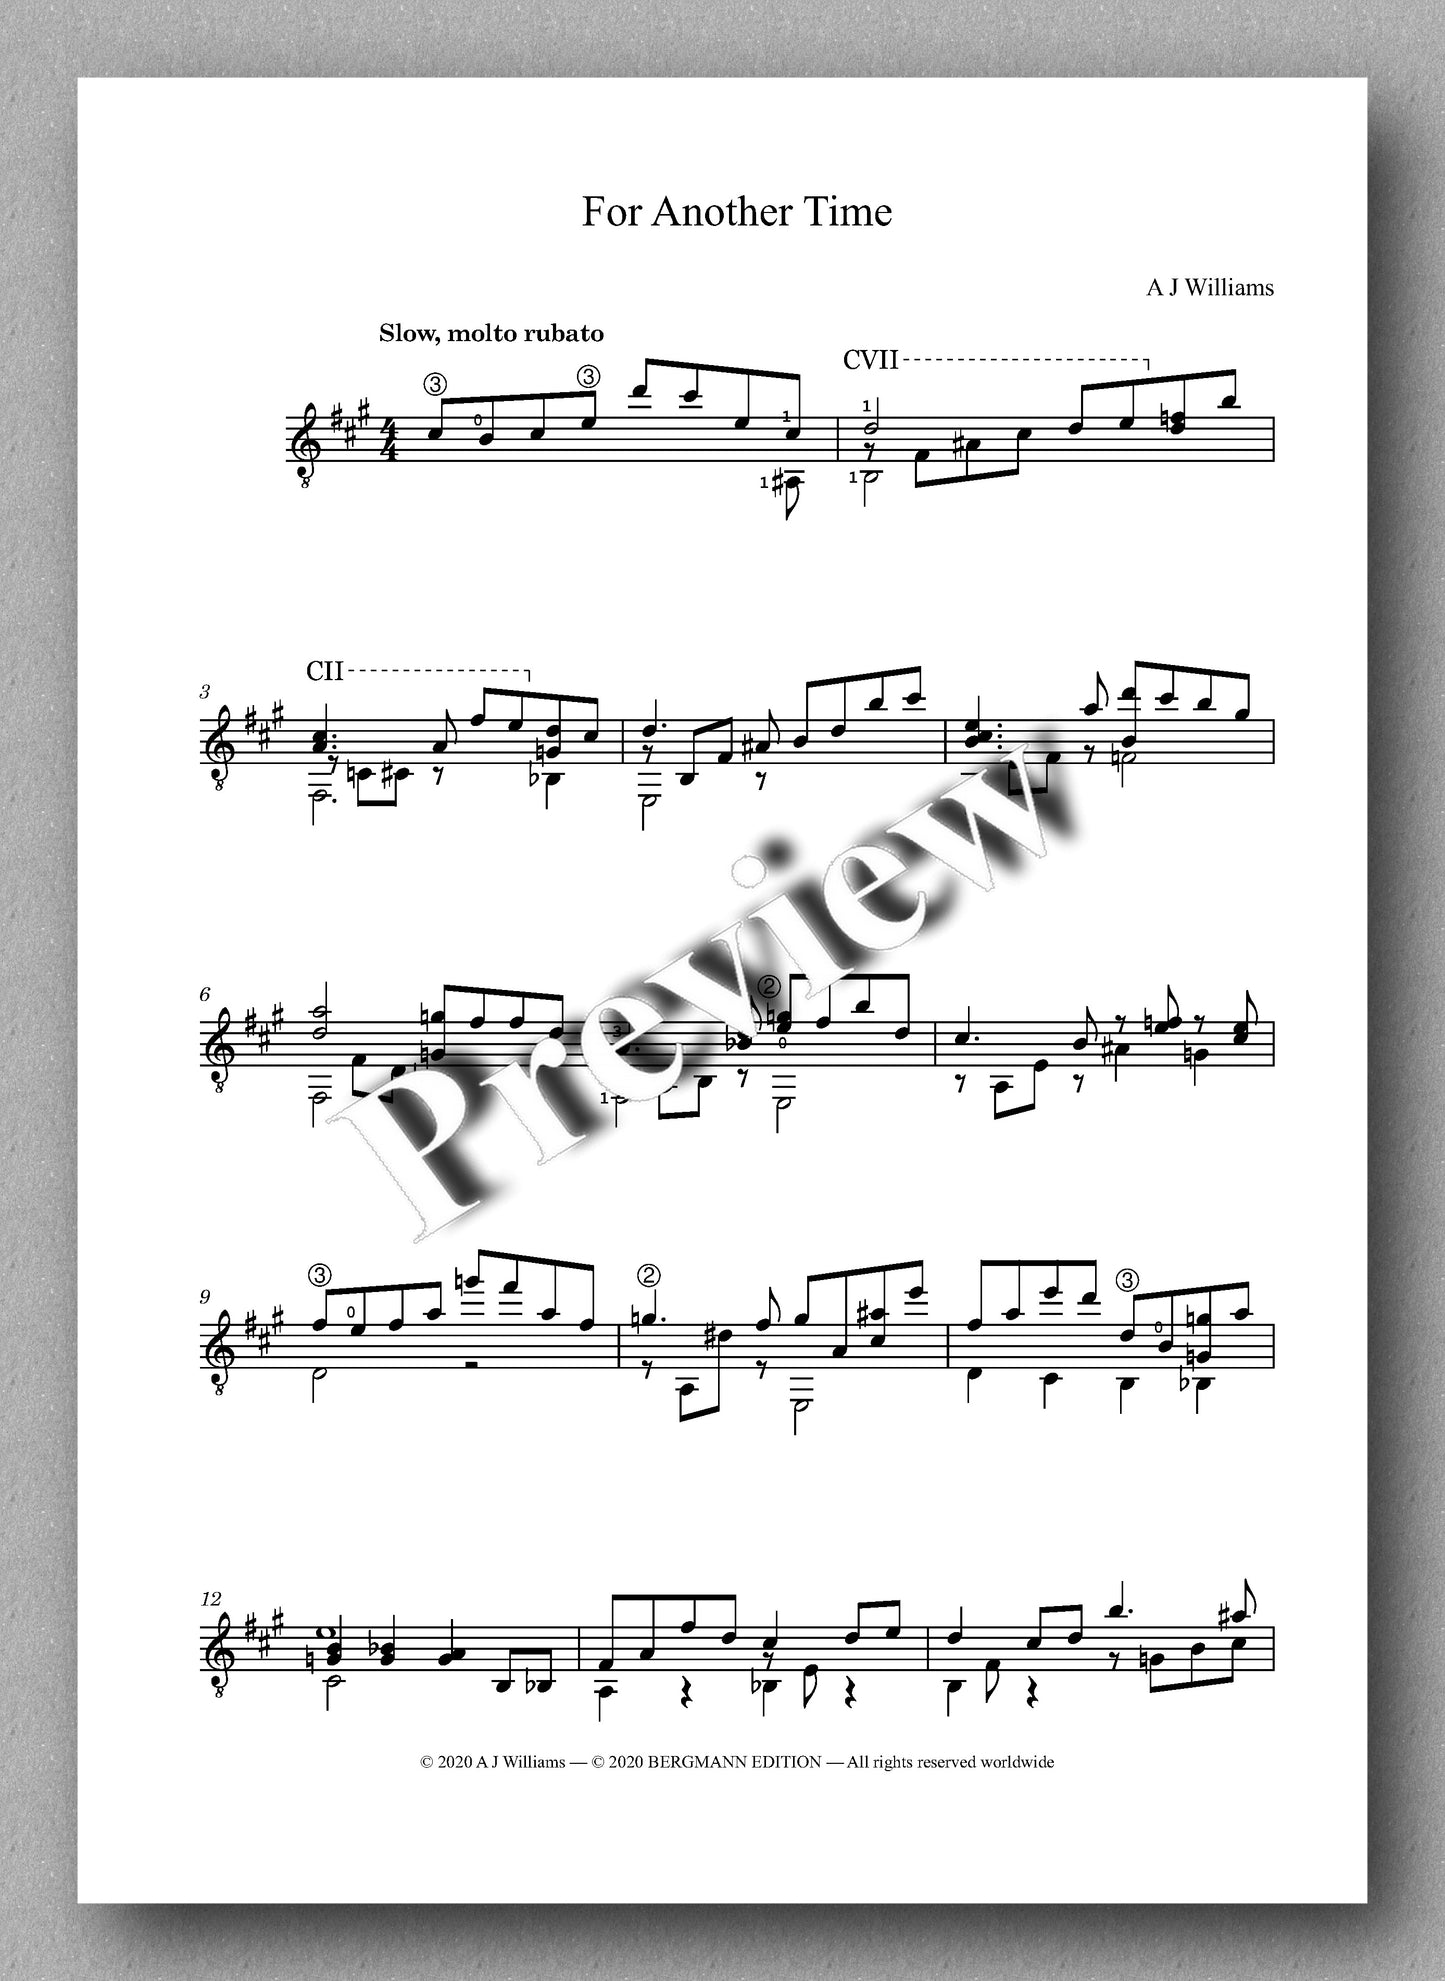 Williams, For Another Time - preview of the music score.